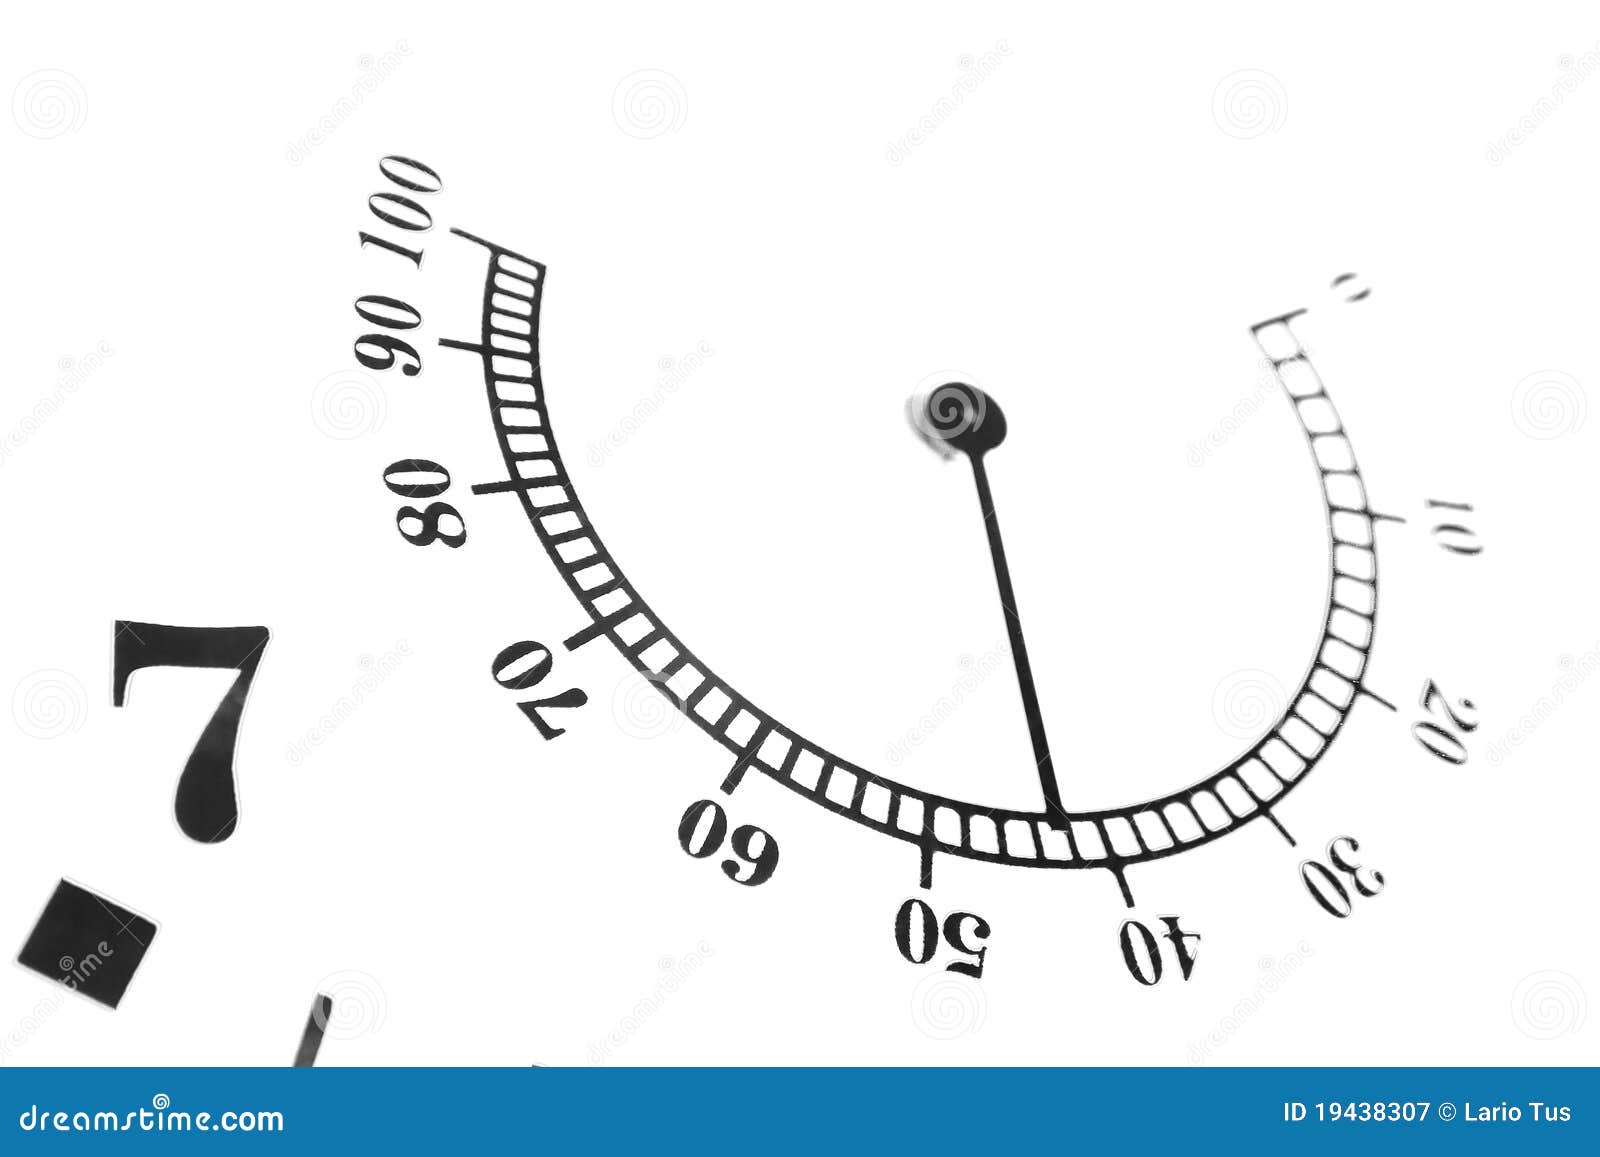 Measurement Scale Royalty Free Stock Photography - Image: 19438307